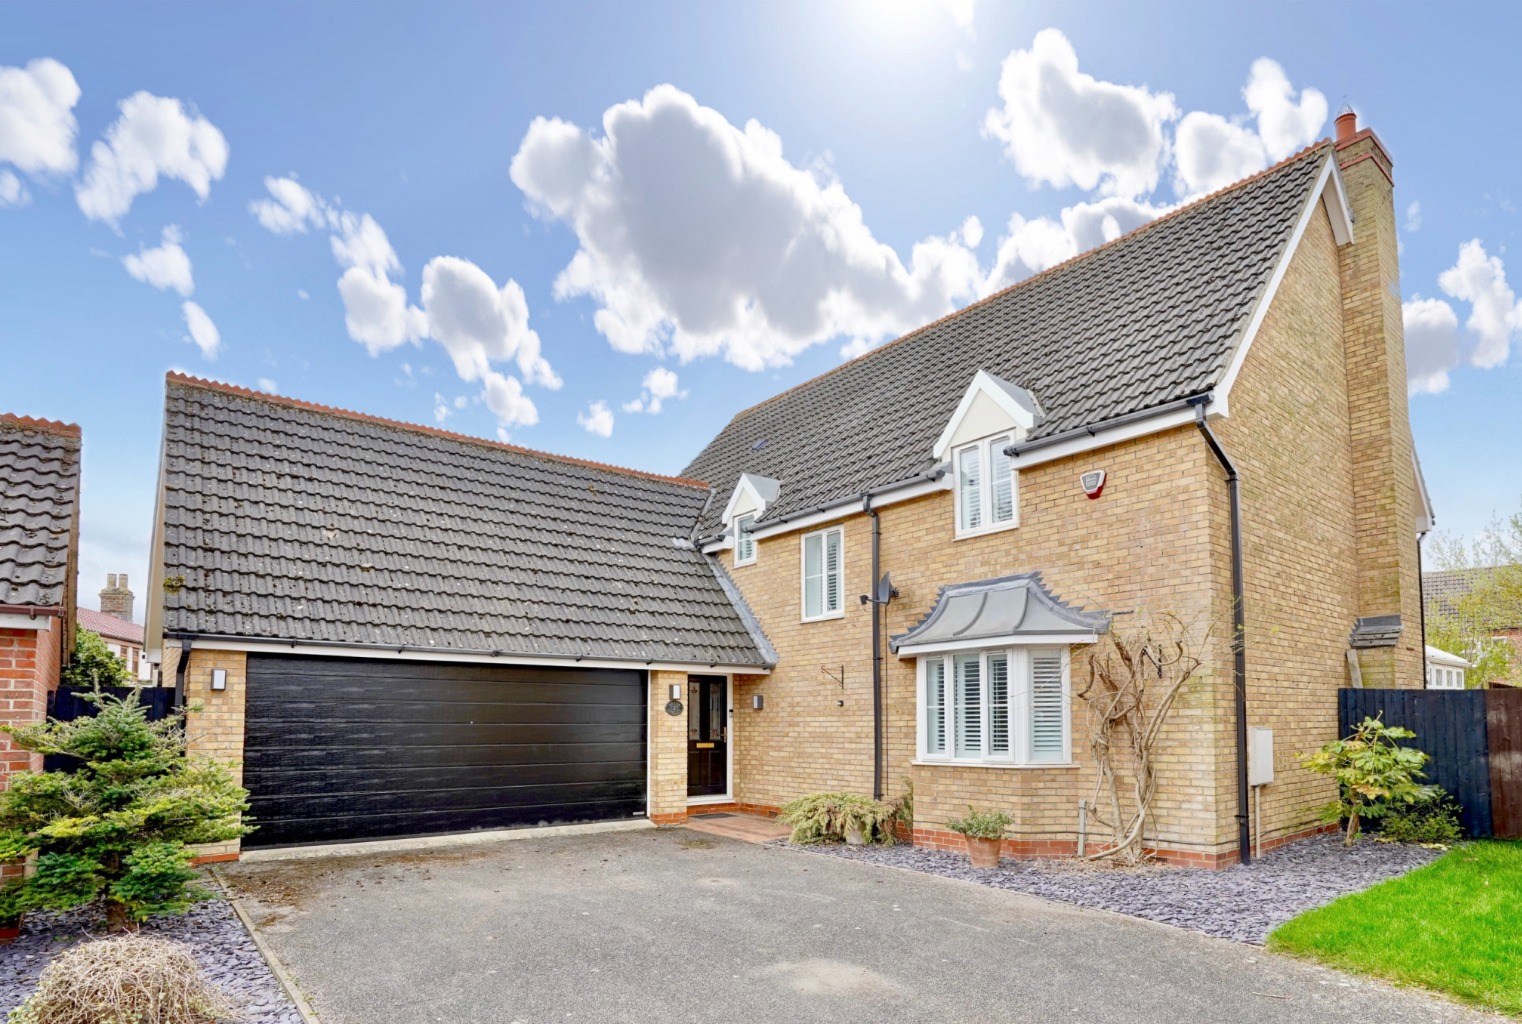 4 bed detached house for sale in Green Gables, St. Neots - Property Image 1